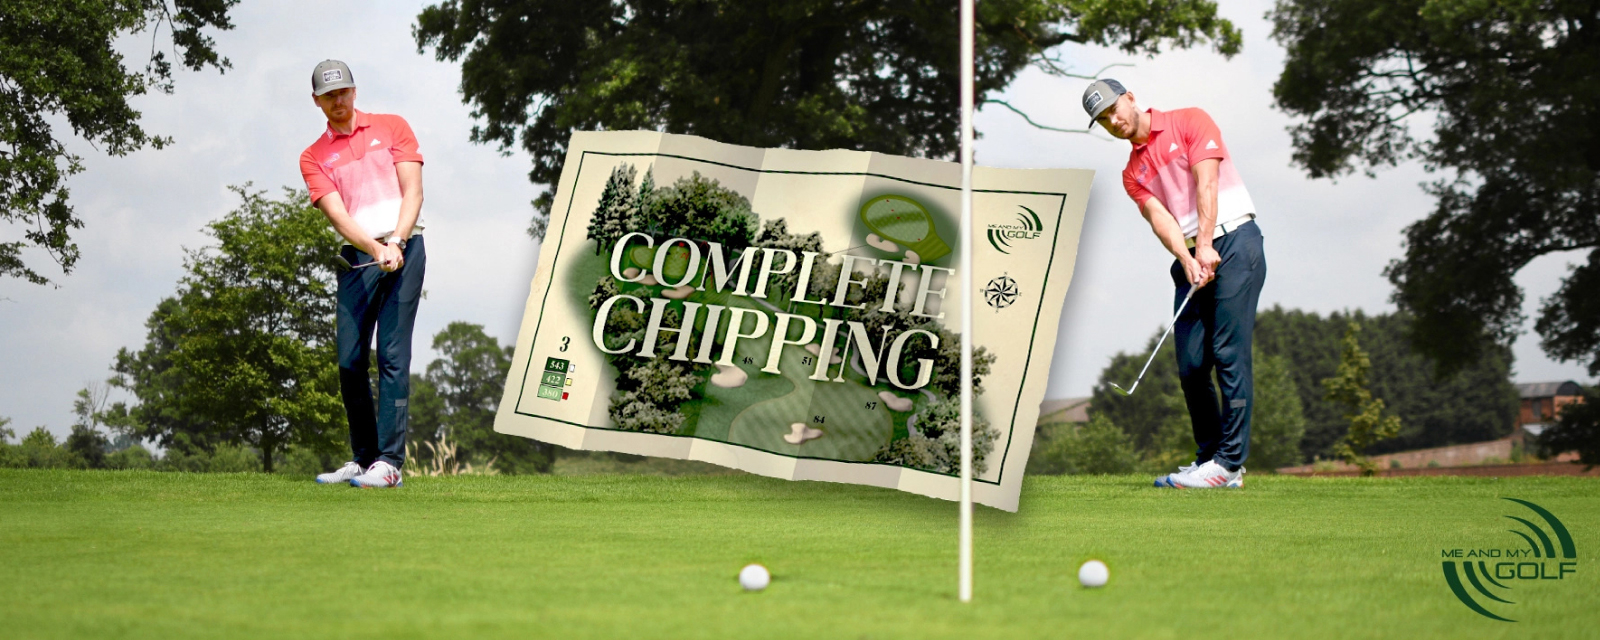 Complete Chipping